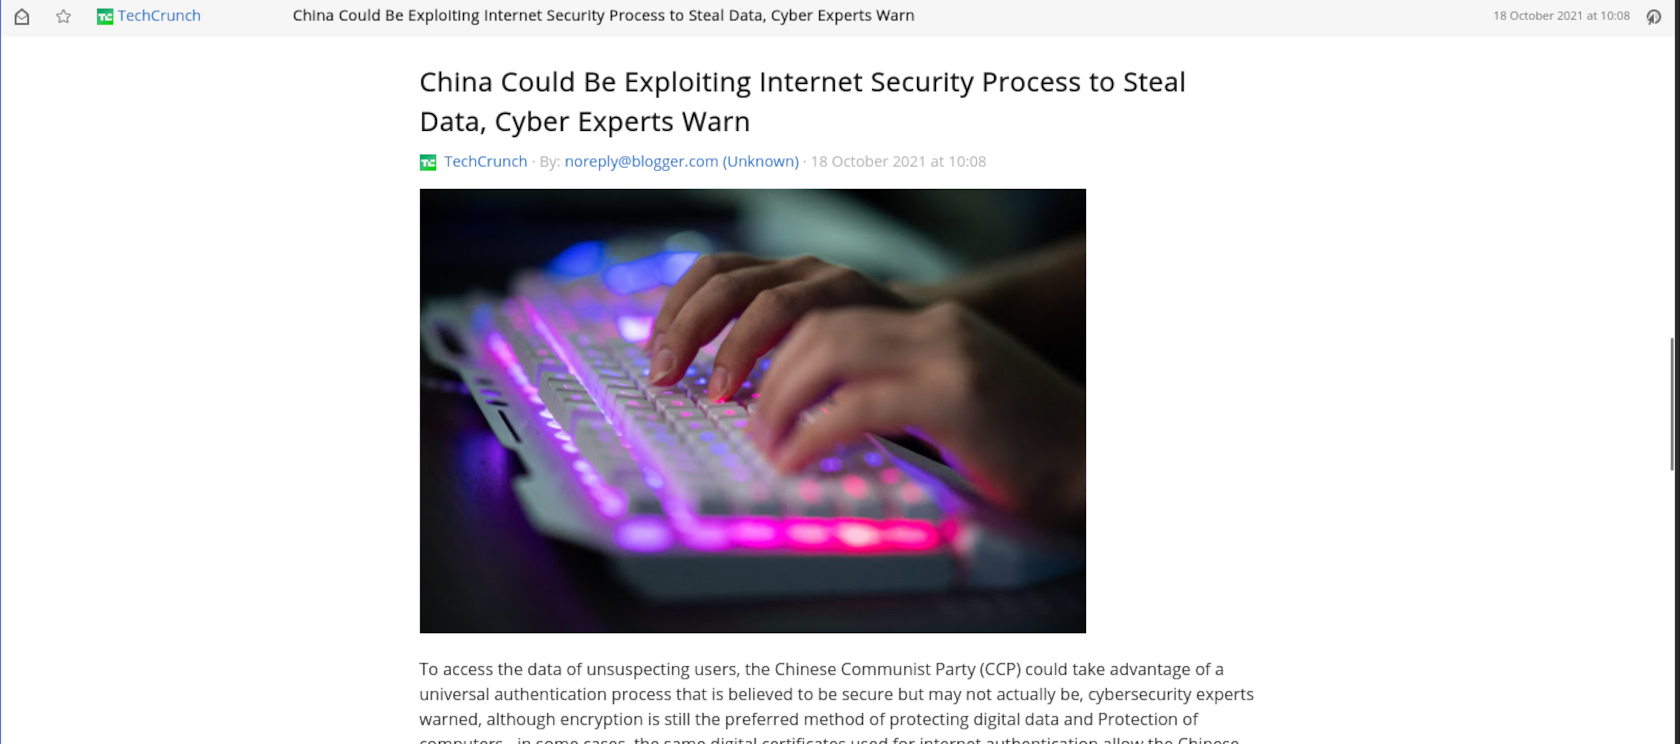 A news article with the headline: China Could Be Exploiting Internet Security Process to Steal Data, Cyber Experts Warn